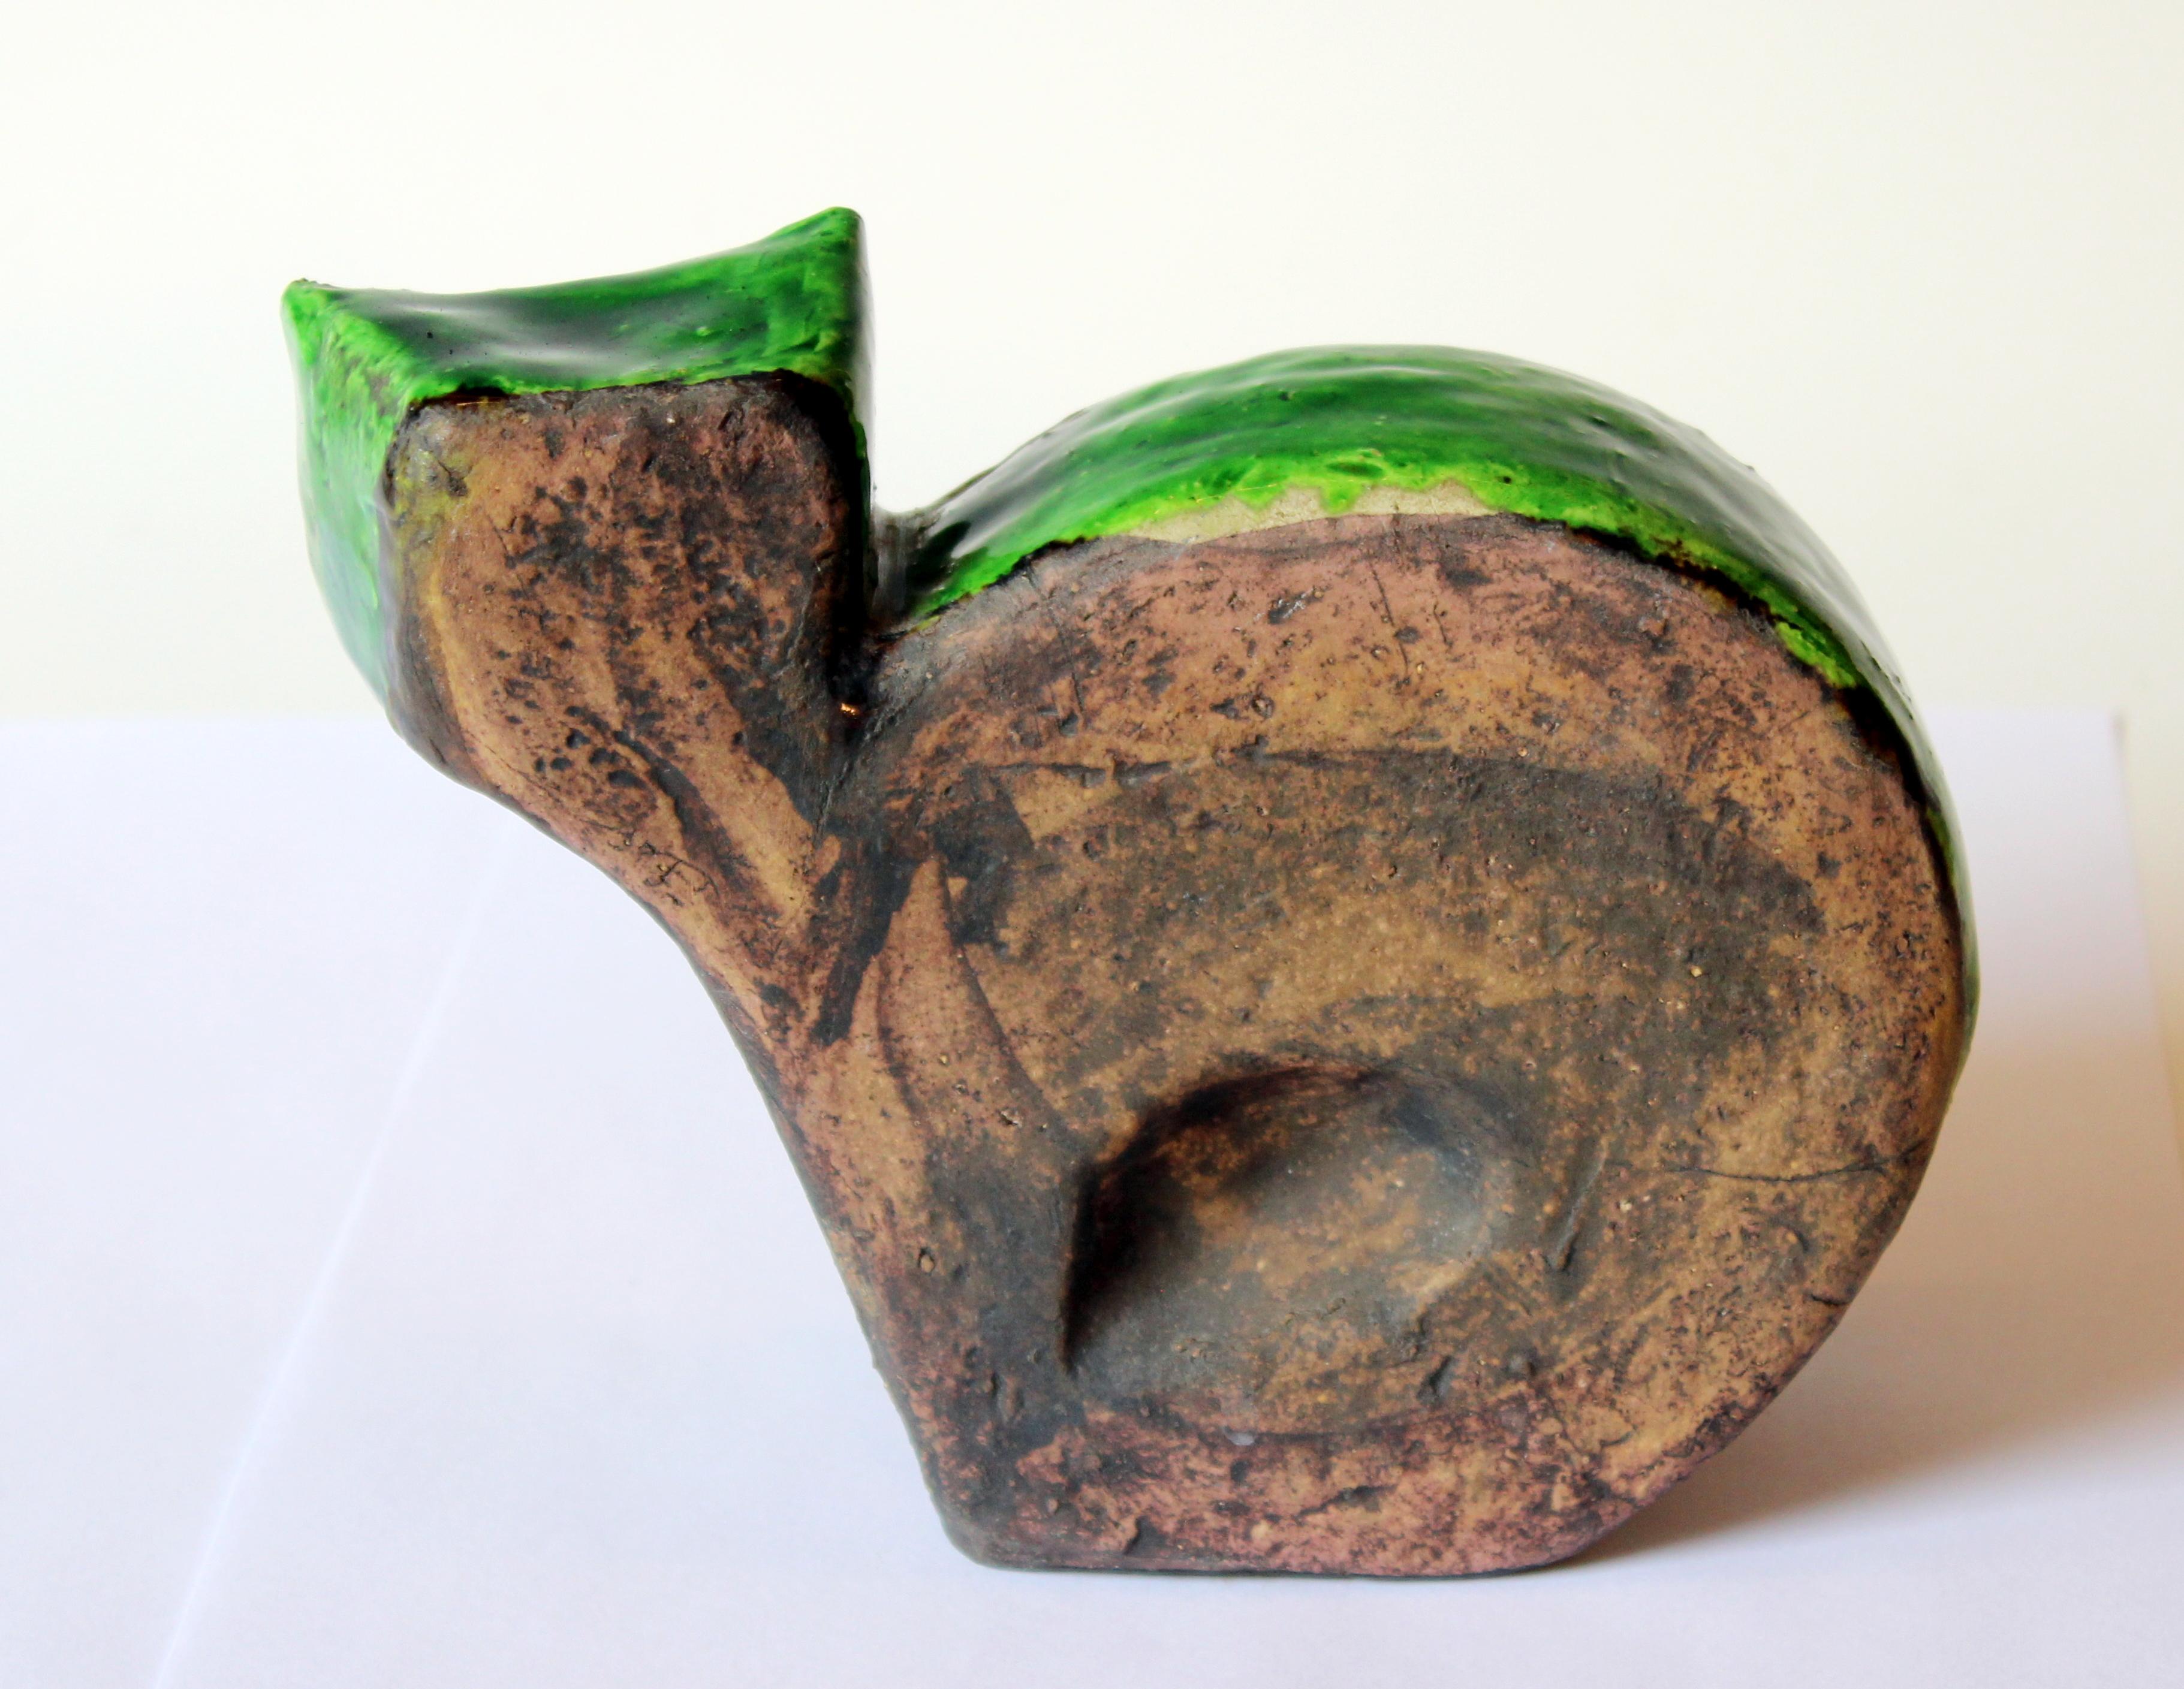 Great, vintage Gli Etrushi (The Etruscans) pottery cat figure designed by ceramicist Ivo De Santis, circa 1960s. Terrific boxy form with extraordinary green drip glaze and grumpy expression. Measures: 5 1/2